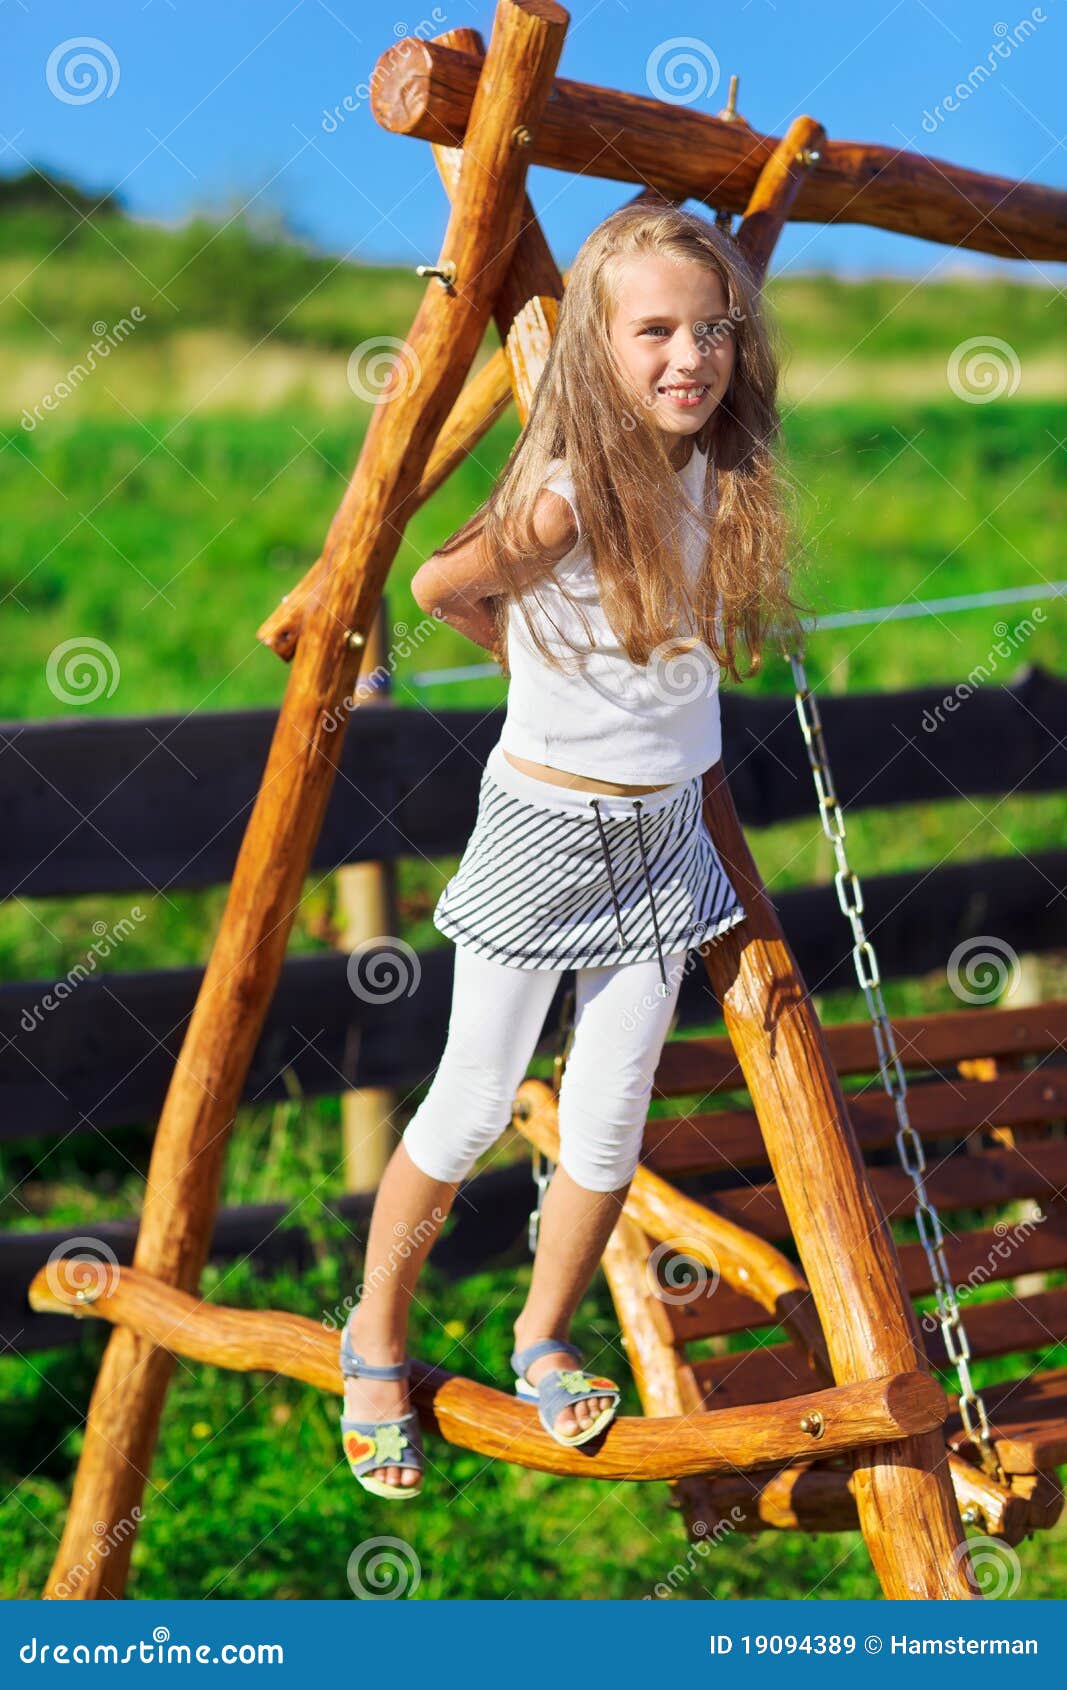 Cute Little Girl Playing on Wooden Chain Swing Stock Image - Image of ...